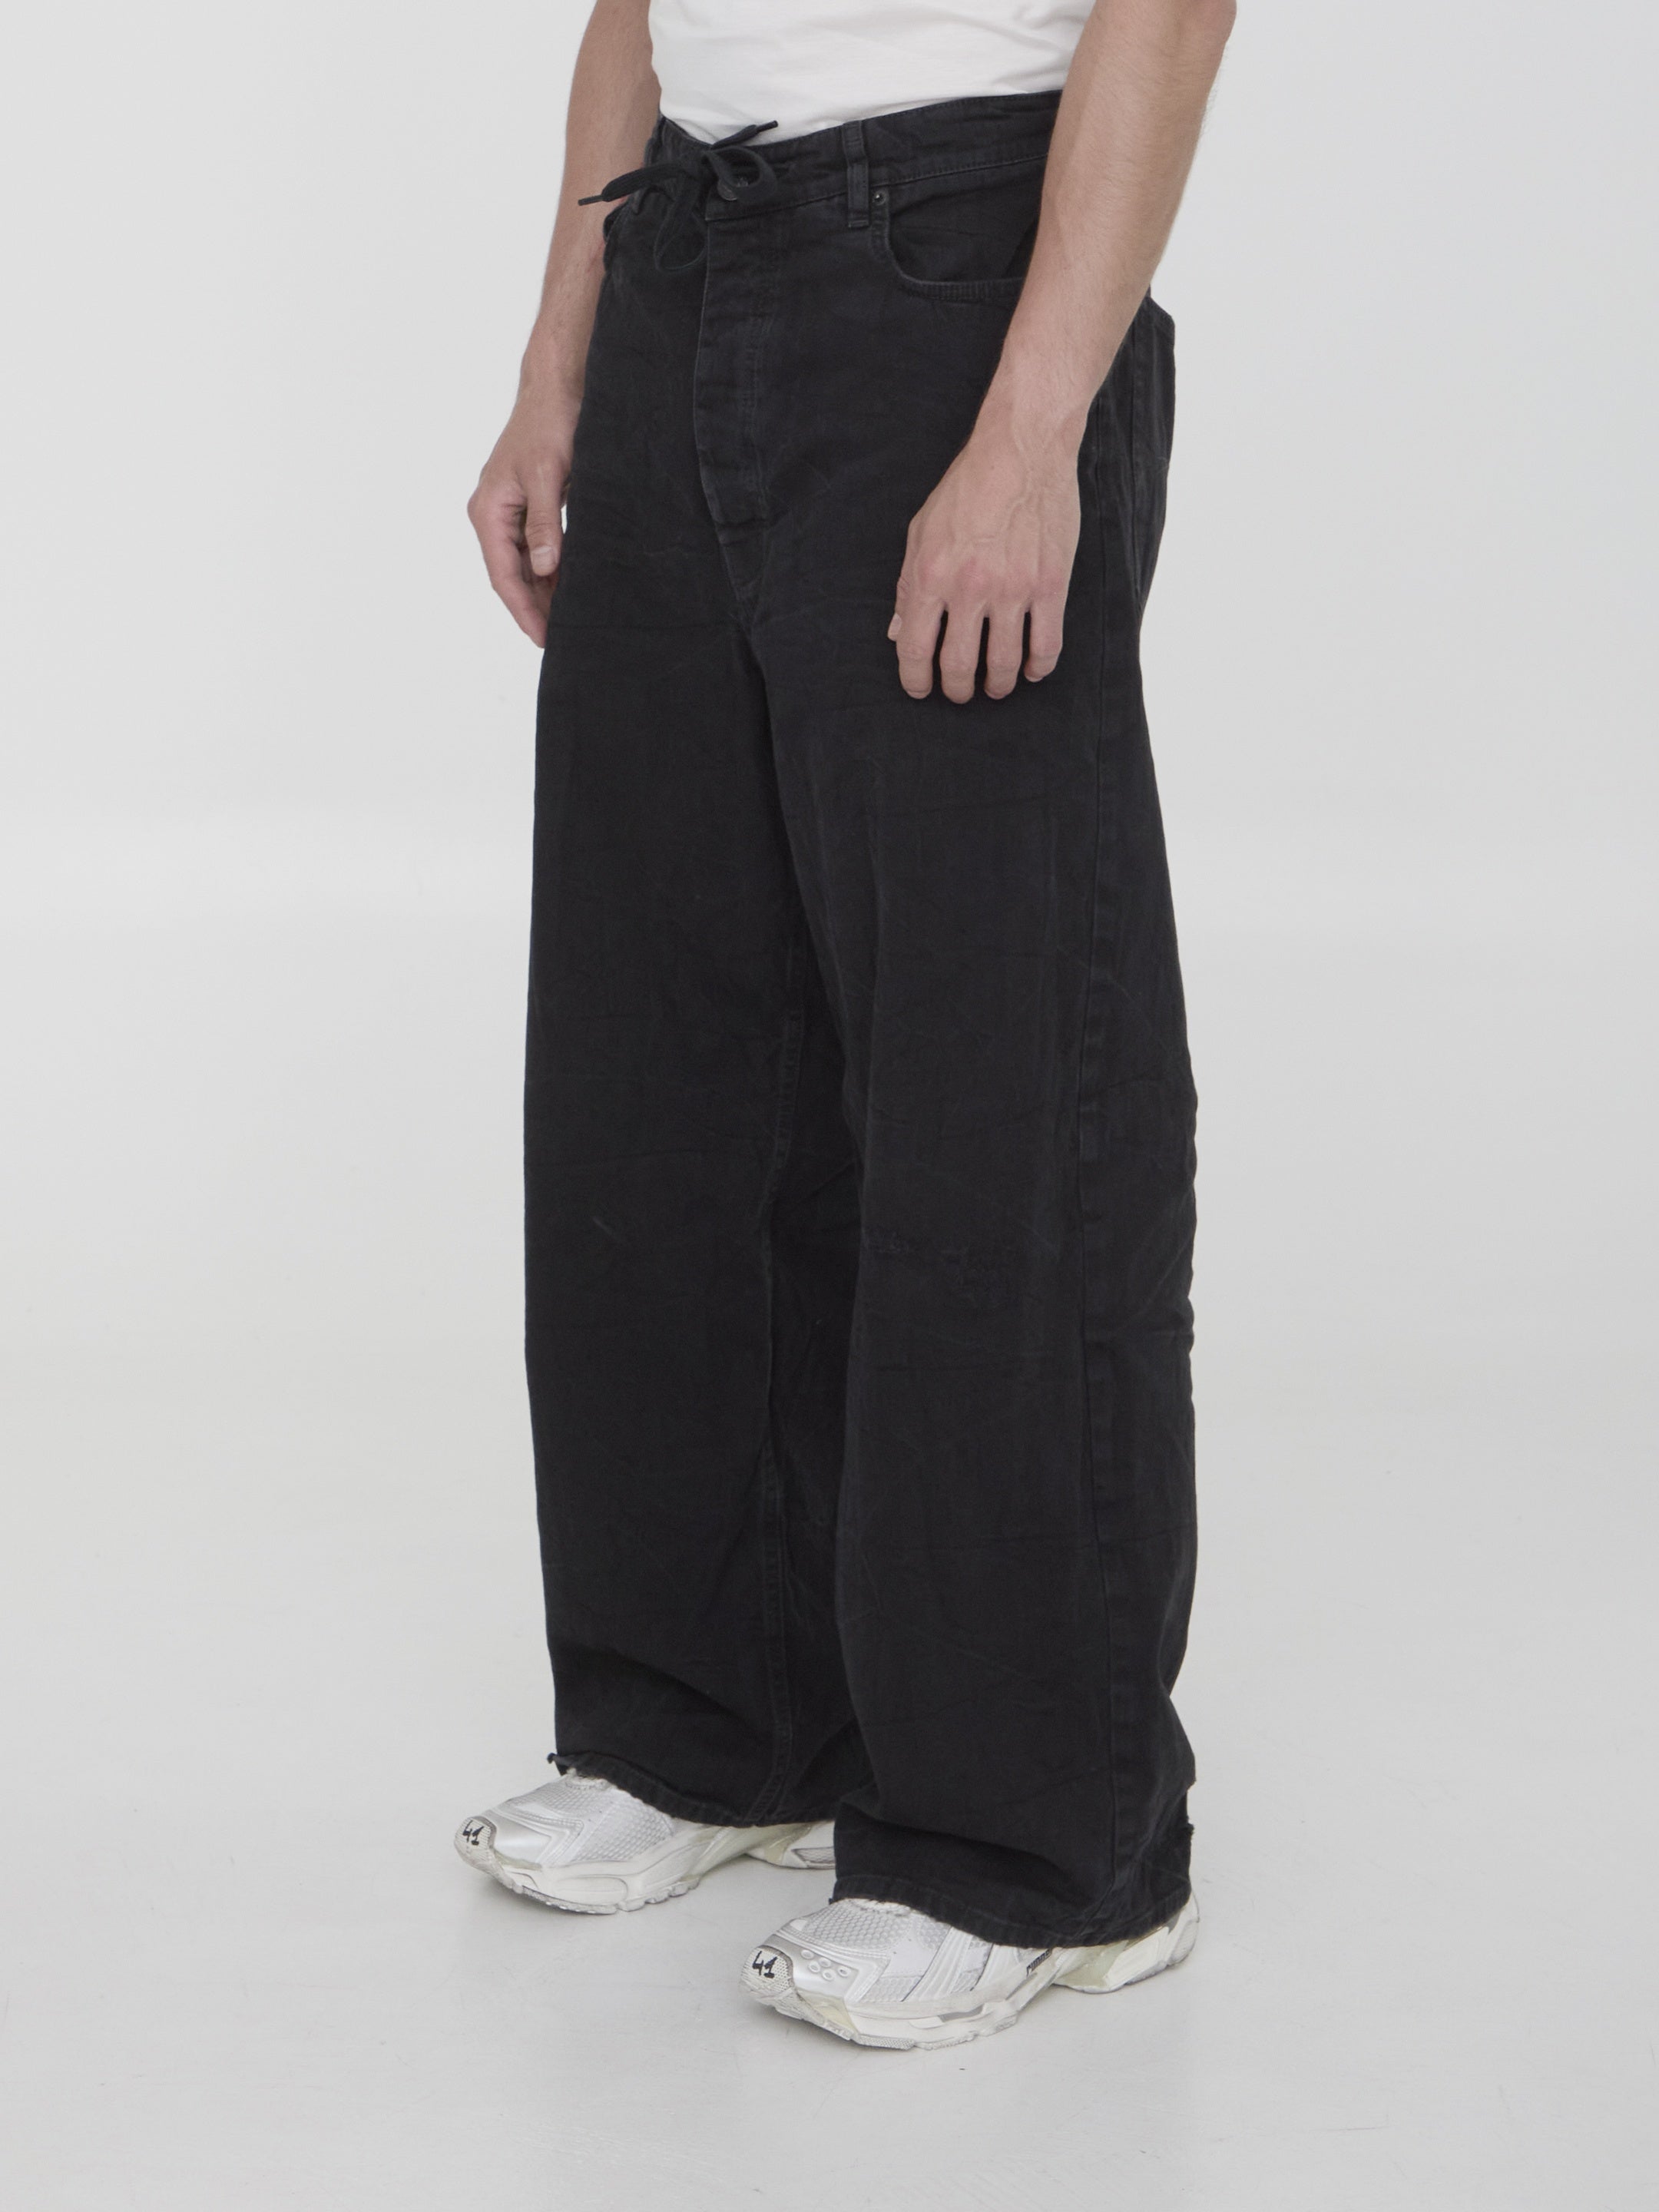 BALENCIAGA-OUTLET-SALE-Baggy-trousers-CLOTHING-S-BLACK-ARCHIVE-COLLECTION-2.jpg